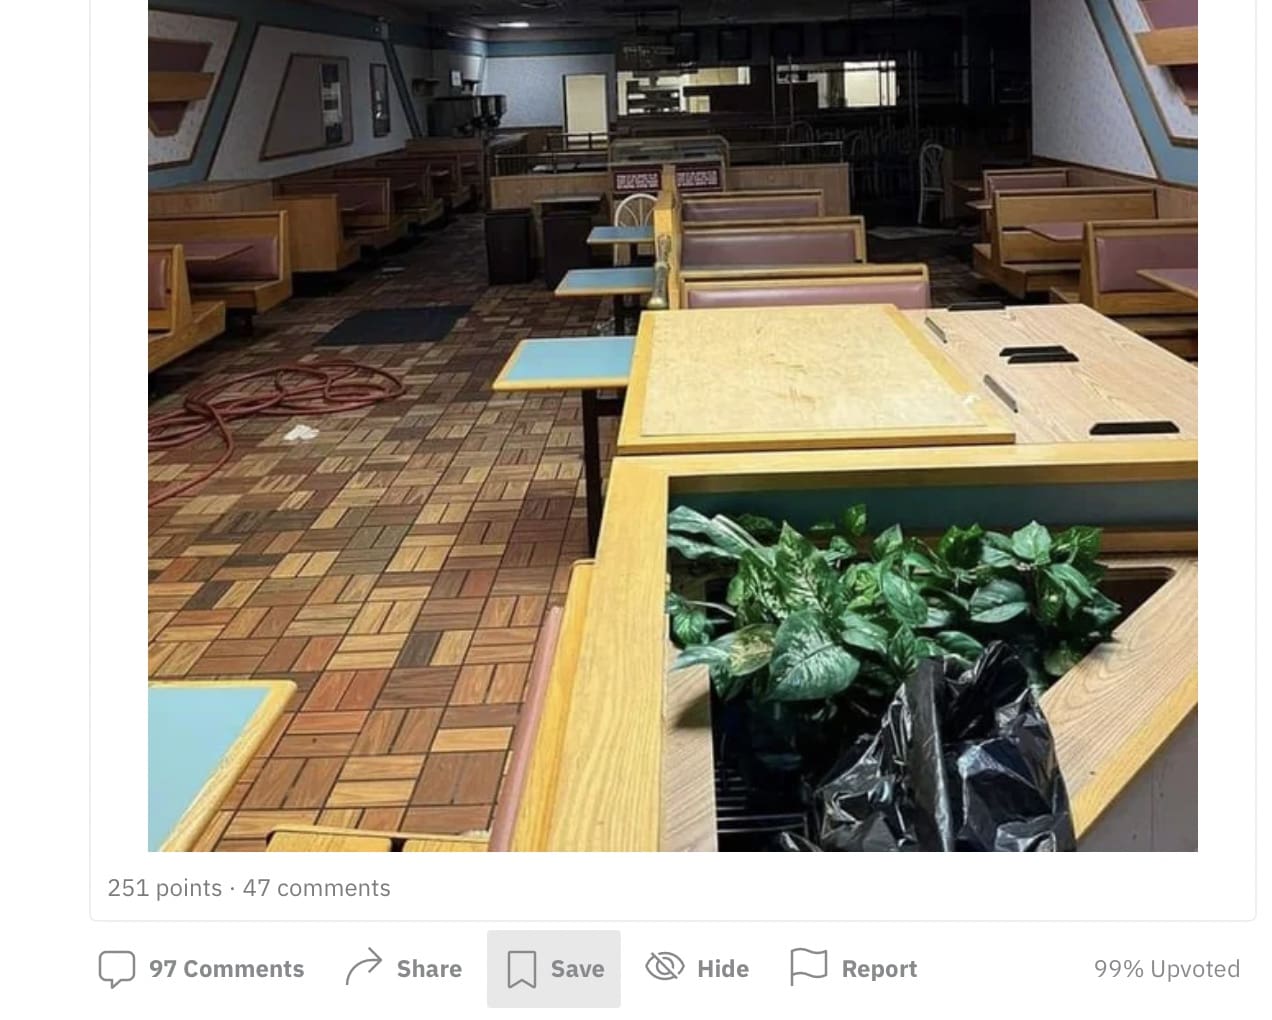 Featured image for “Abandoned Burger King found in Concord Mall sends Internet wild”